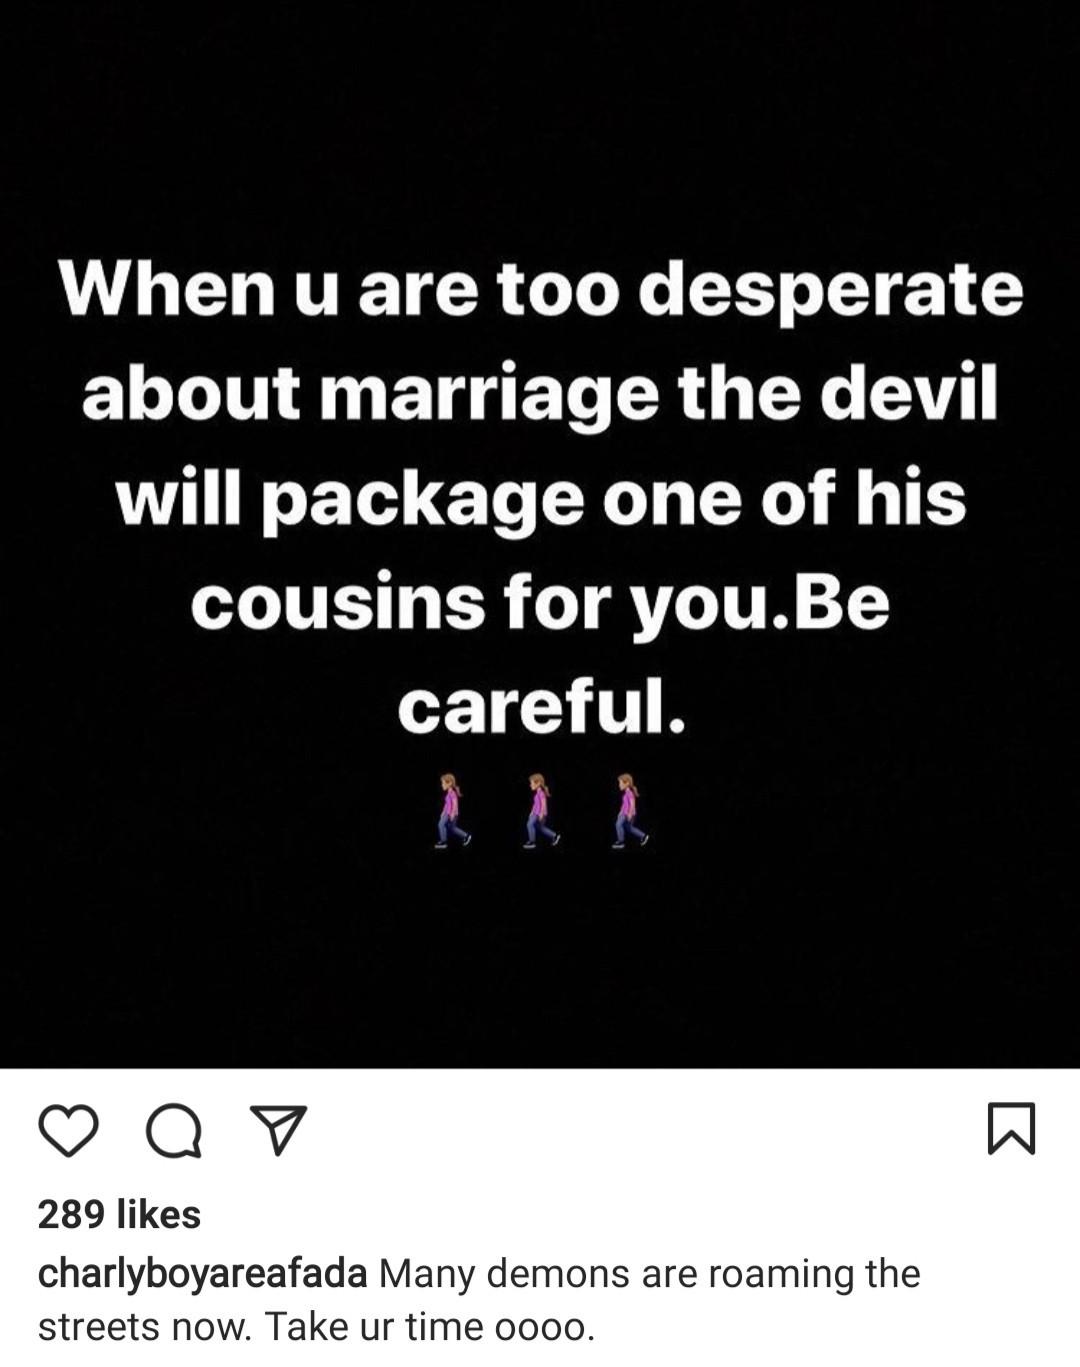 "You'll end up with the devil's cousin if you're desperate for marriage" - Charly Boy